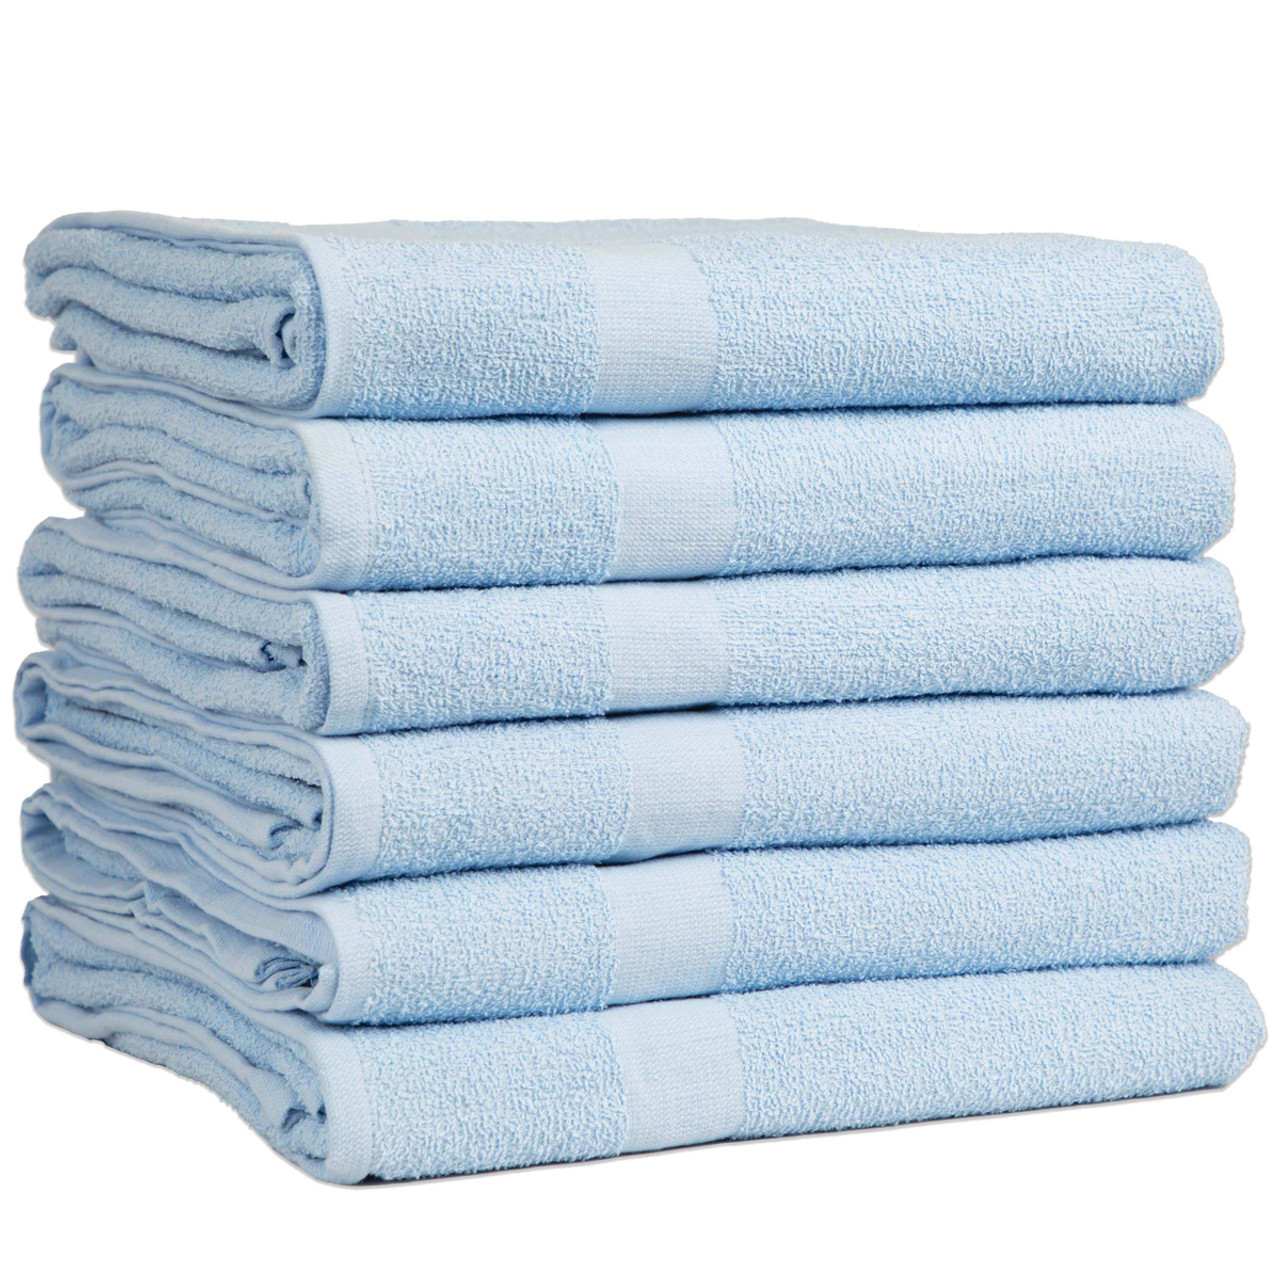 https://cdn11.bigcommerce.com/s-a5uwe4c7wz/images/stencil/1280x1280/products/970/2511/Cotton-Terry-Pool-Towels-36x68-Blue-Stack__37155.1688043661.jpg?c=1